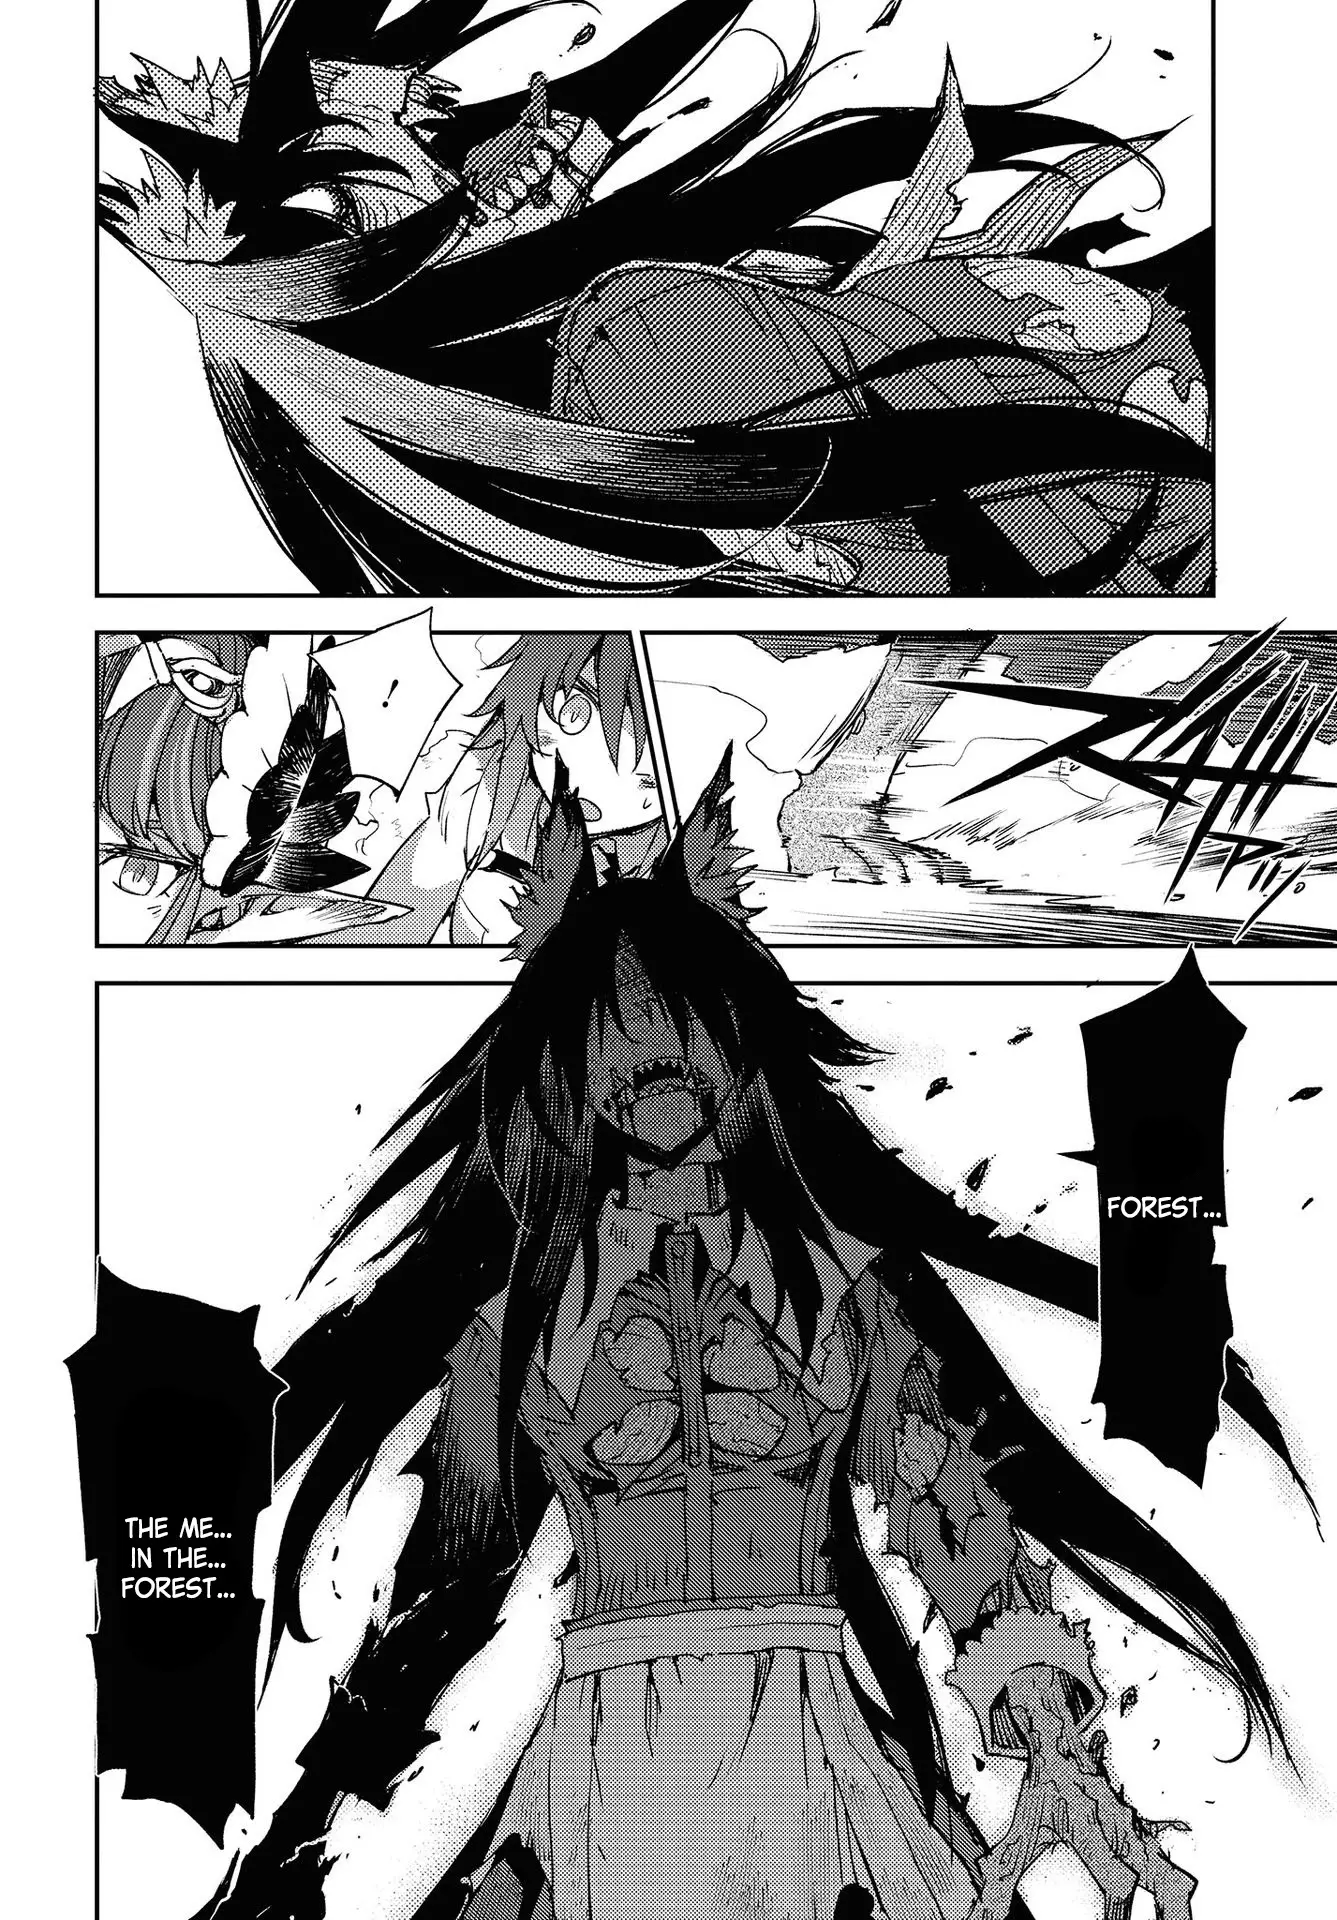 Fate/grand Order: Epic Of Remnant - Subspecies Singularity Iv: Taboo Advent Salem: Salem Of Heresy - 18 page 7